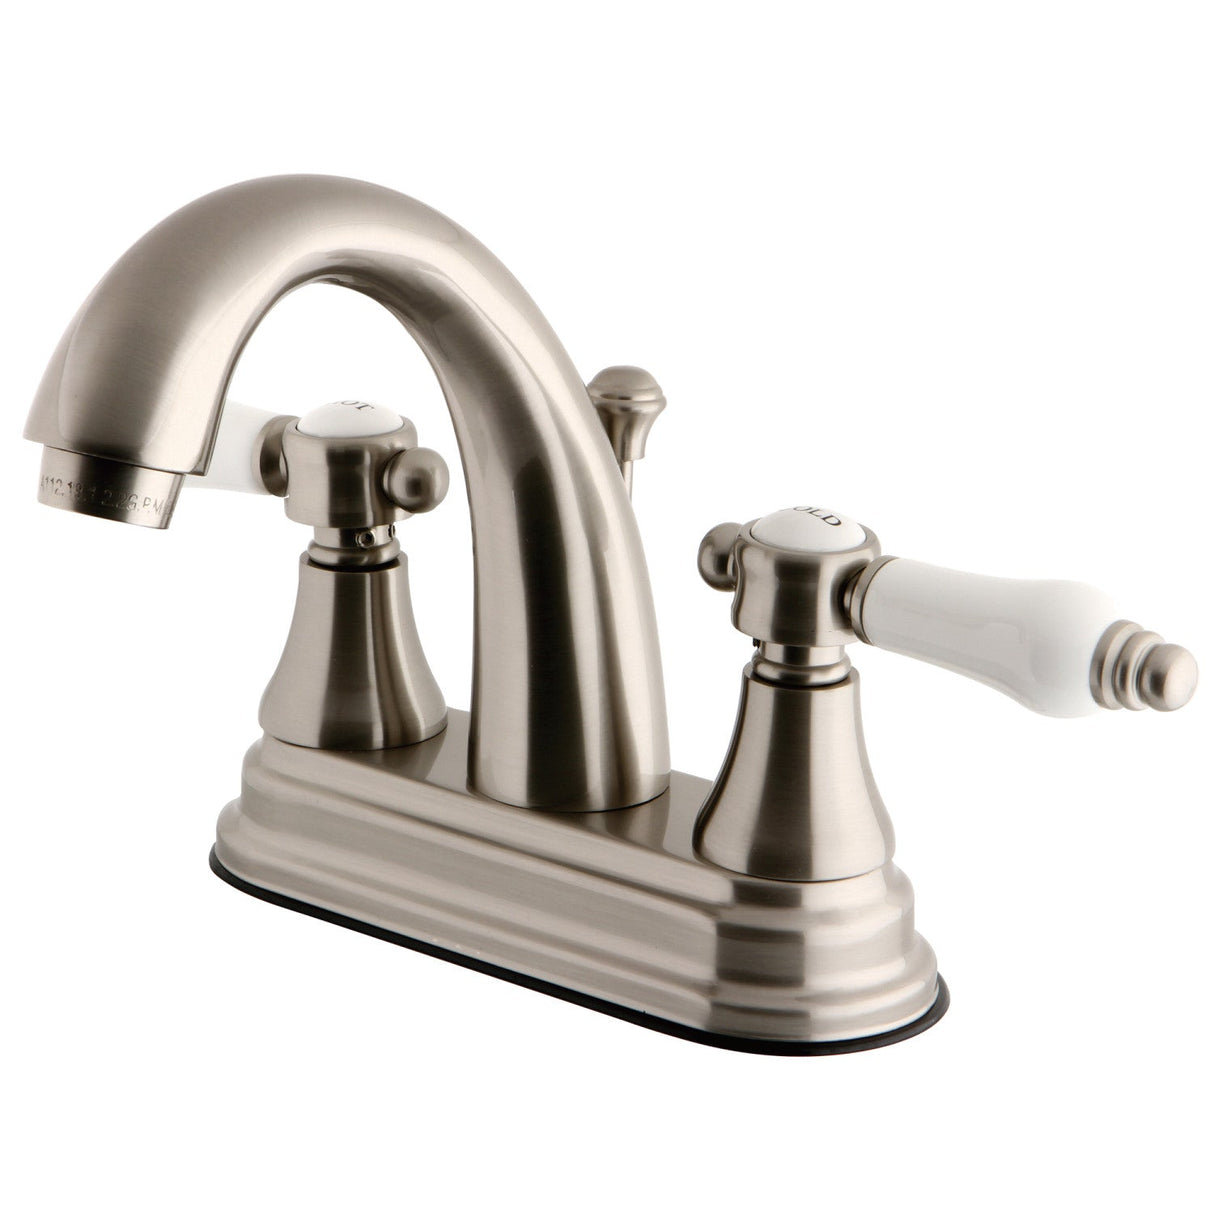 Bel-Air KS7618BPL Two-Handle 3-Hole Deck Mount 4" Centerset Bathroom Faucet with Brass Pop-Up, Brushed Nickel